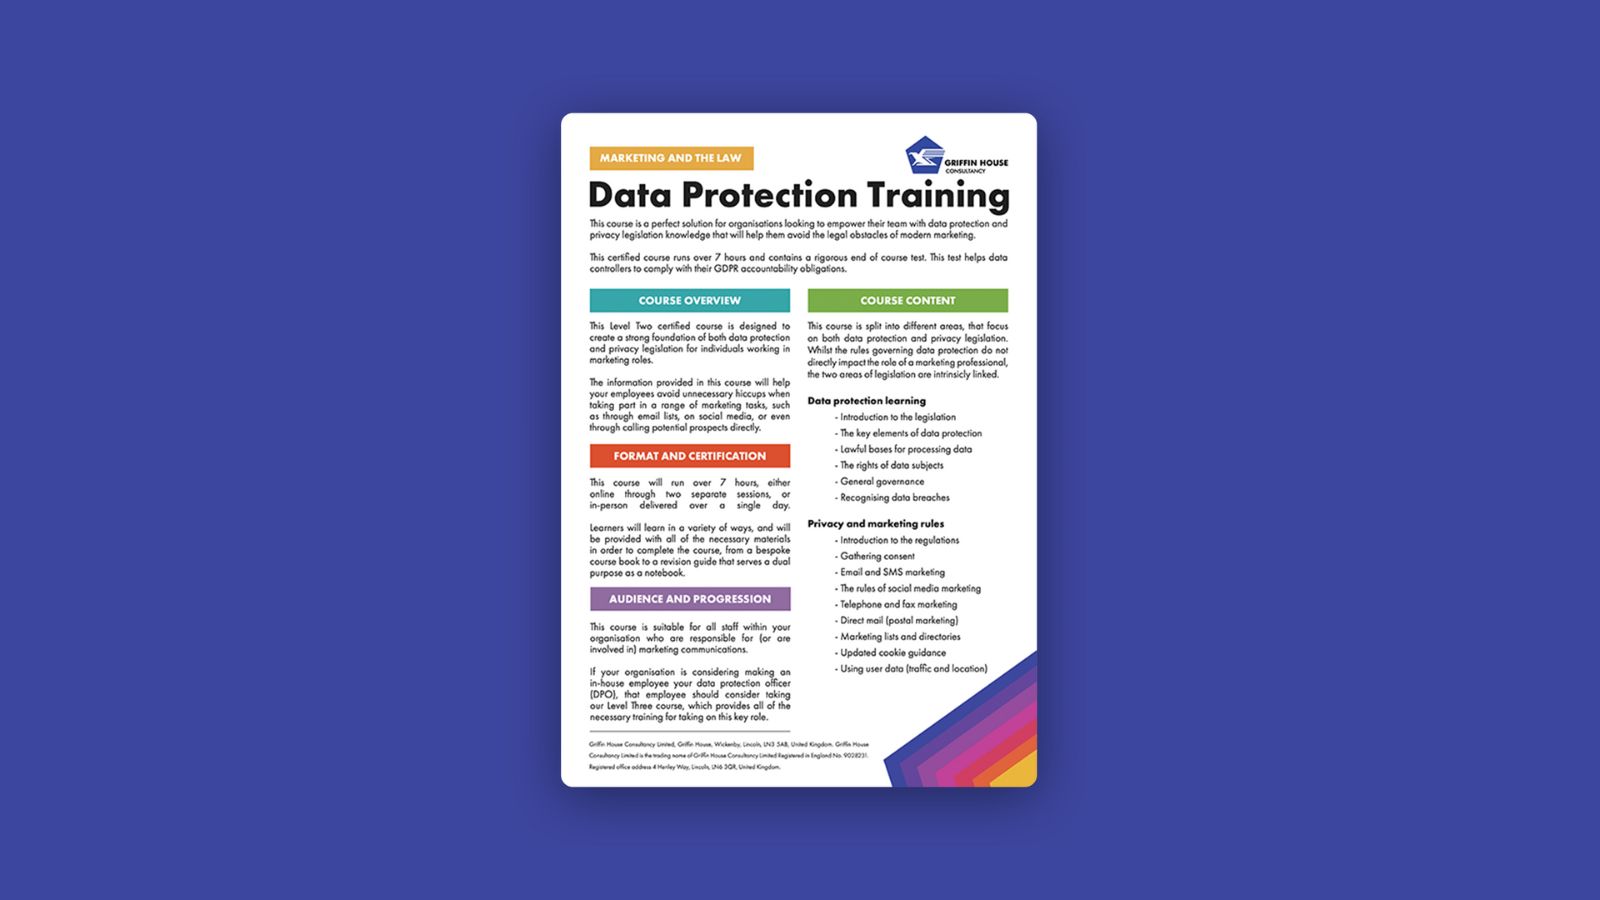 Date protection training newsletter Griffin House Consultancy